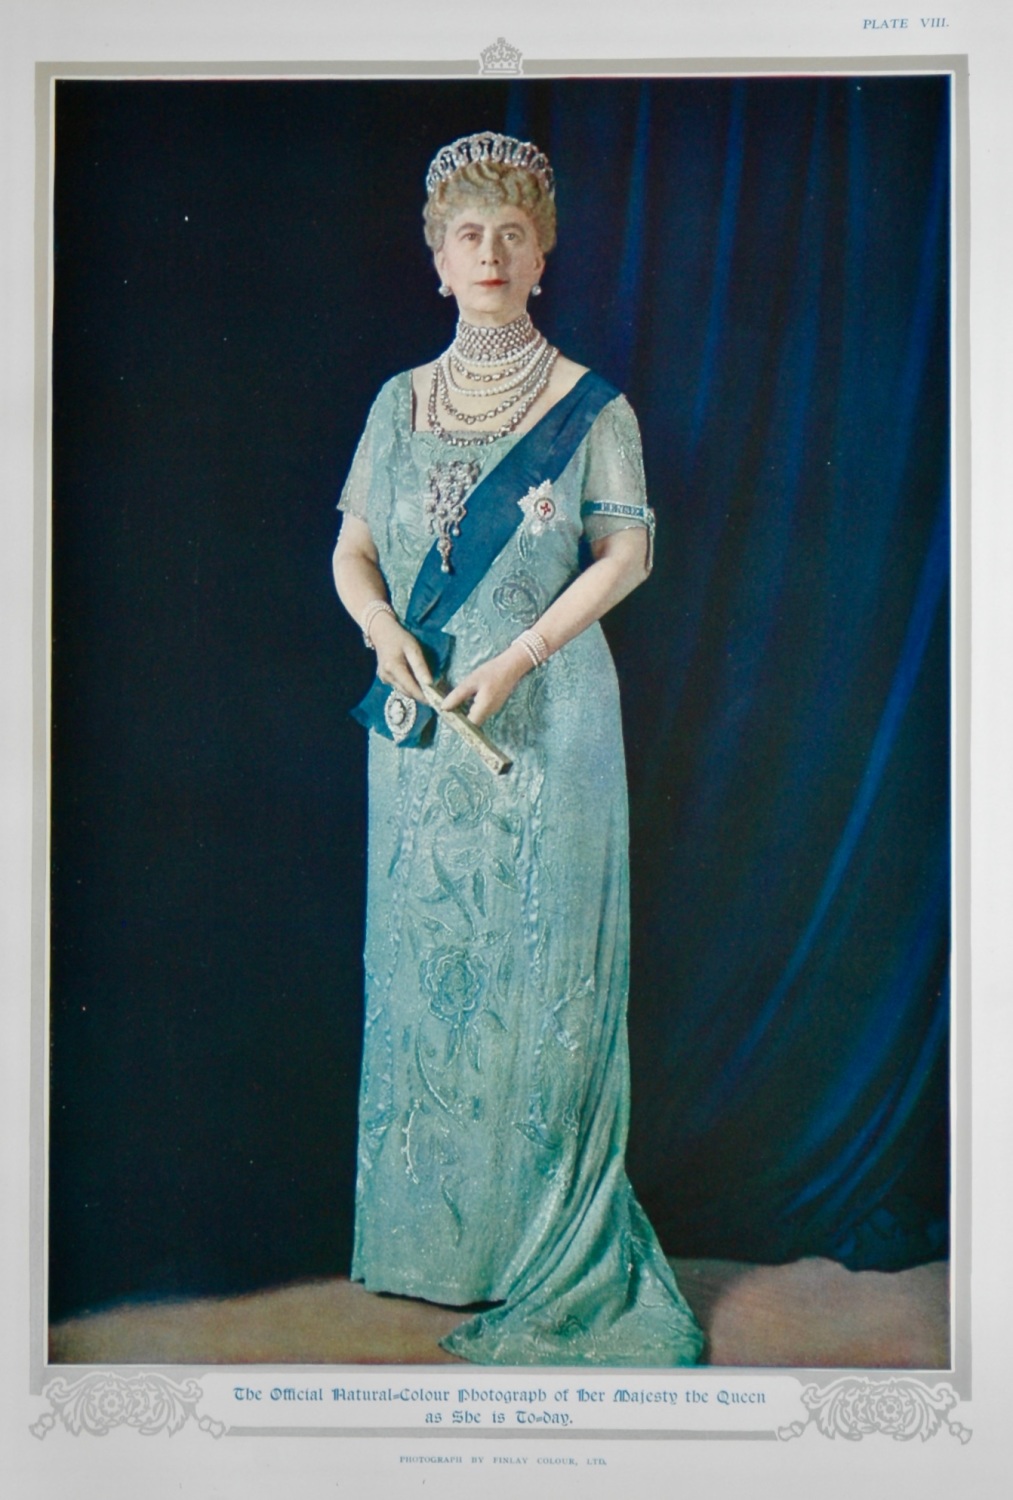 The Official Natural-Colour Photograph of Her Majesty the Queen as she is T